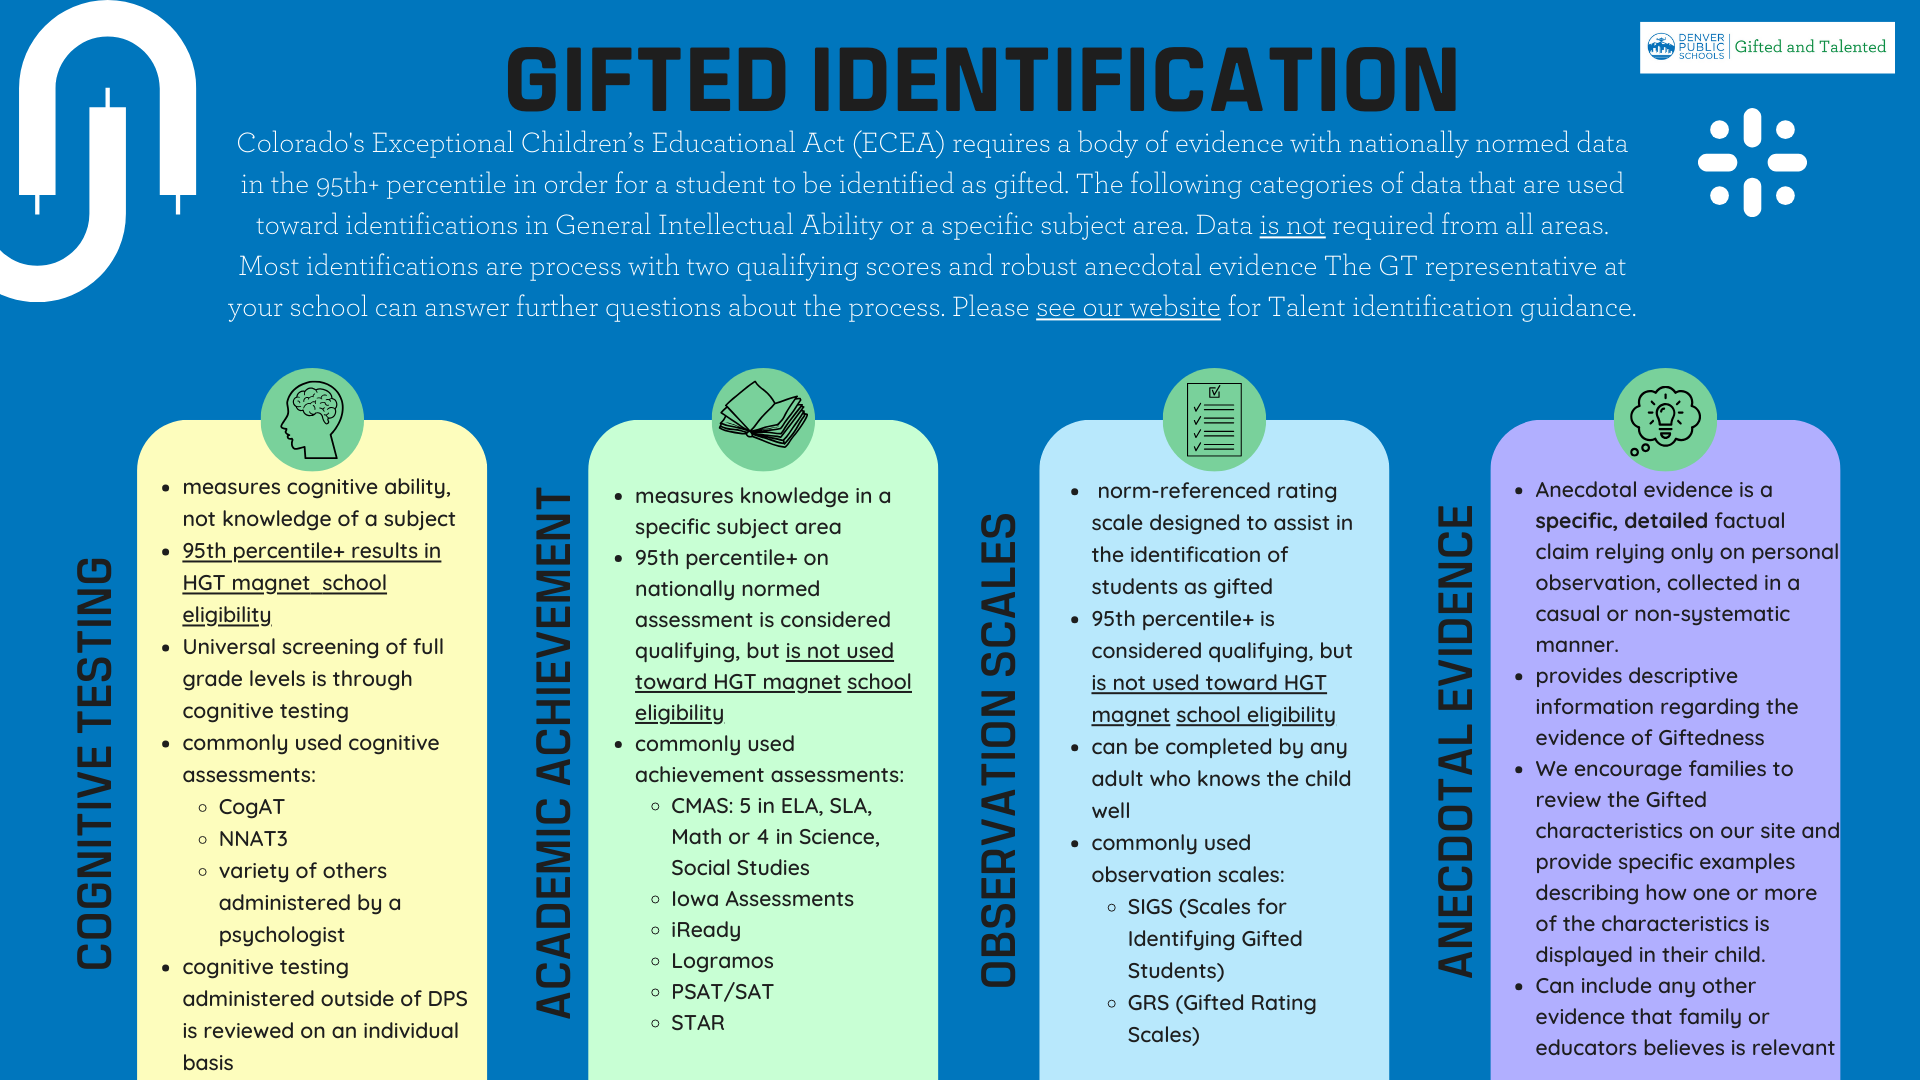 Gifted Identification